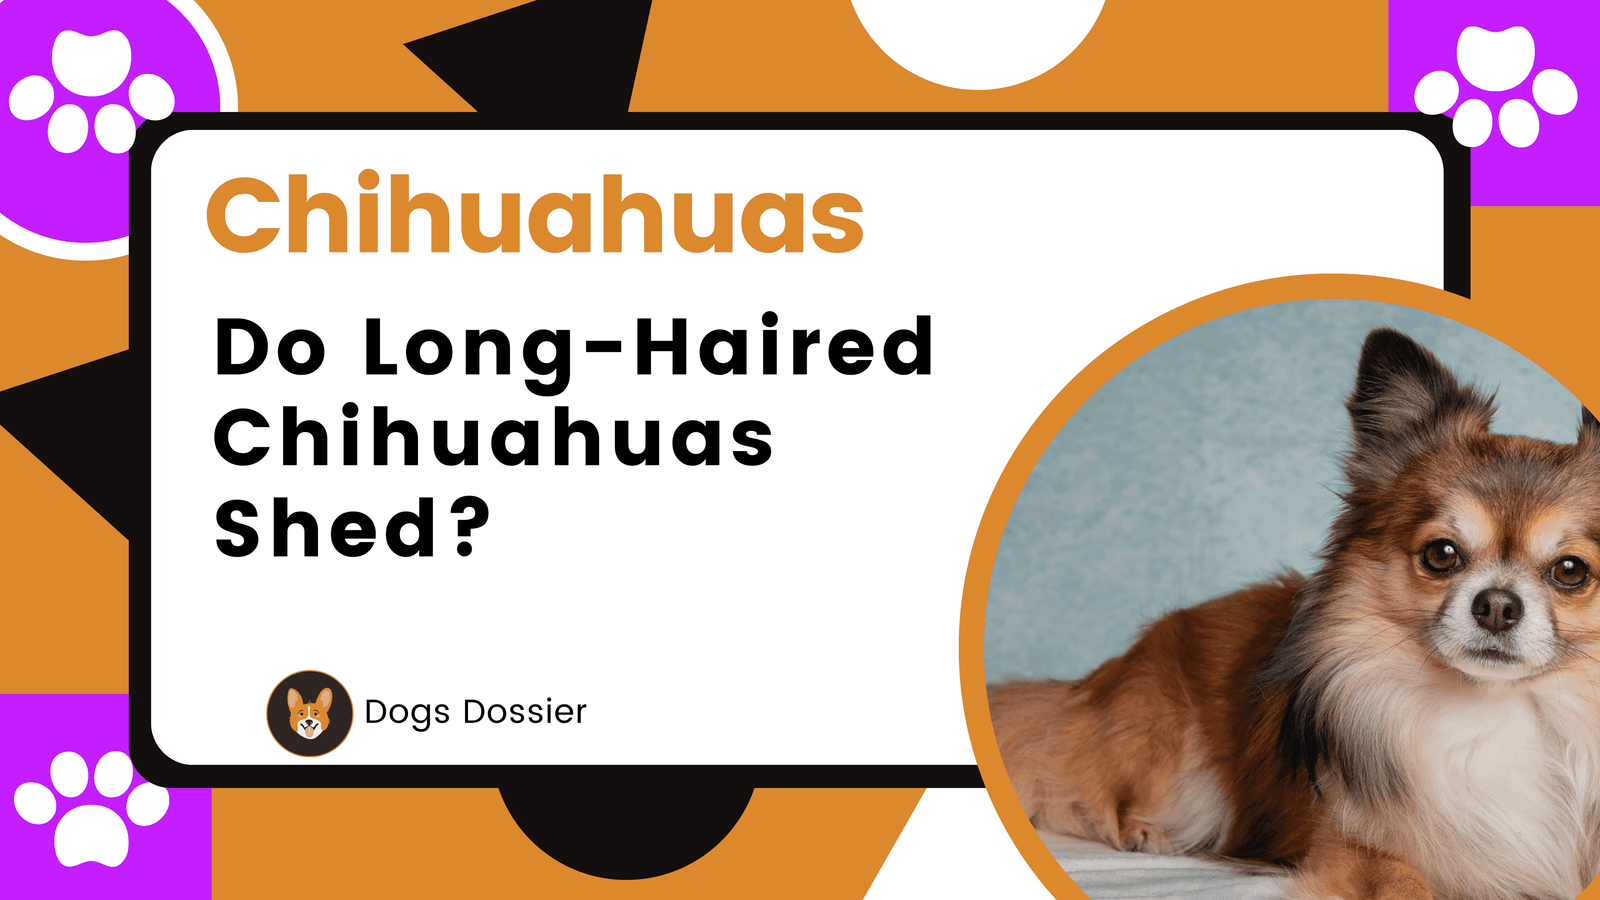 Do Long-Haired Chihuahuas Shed?